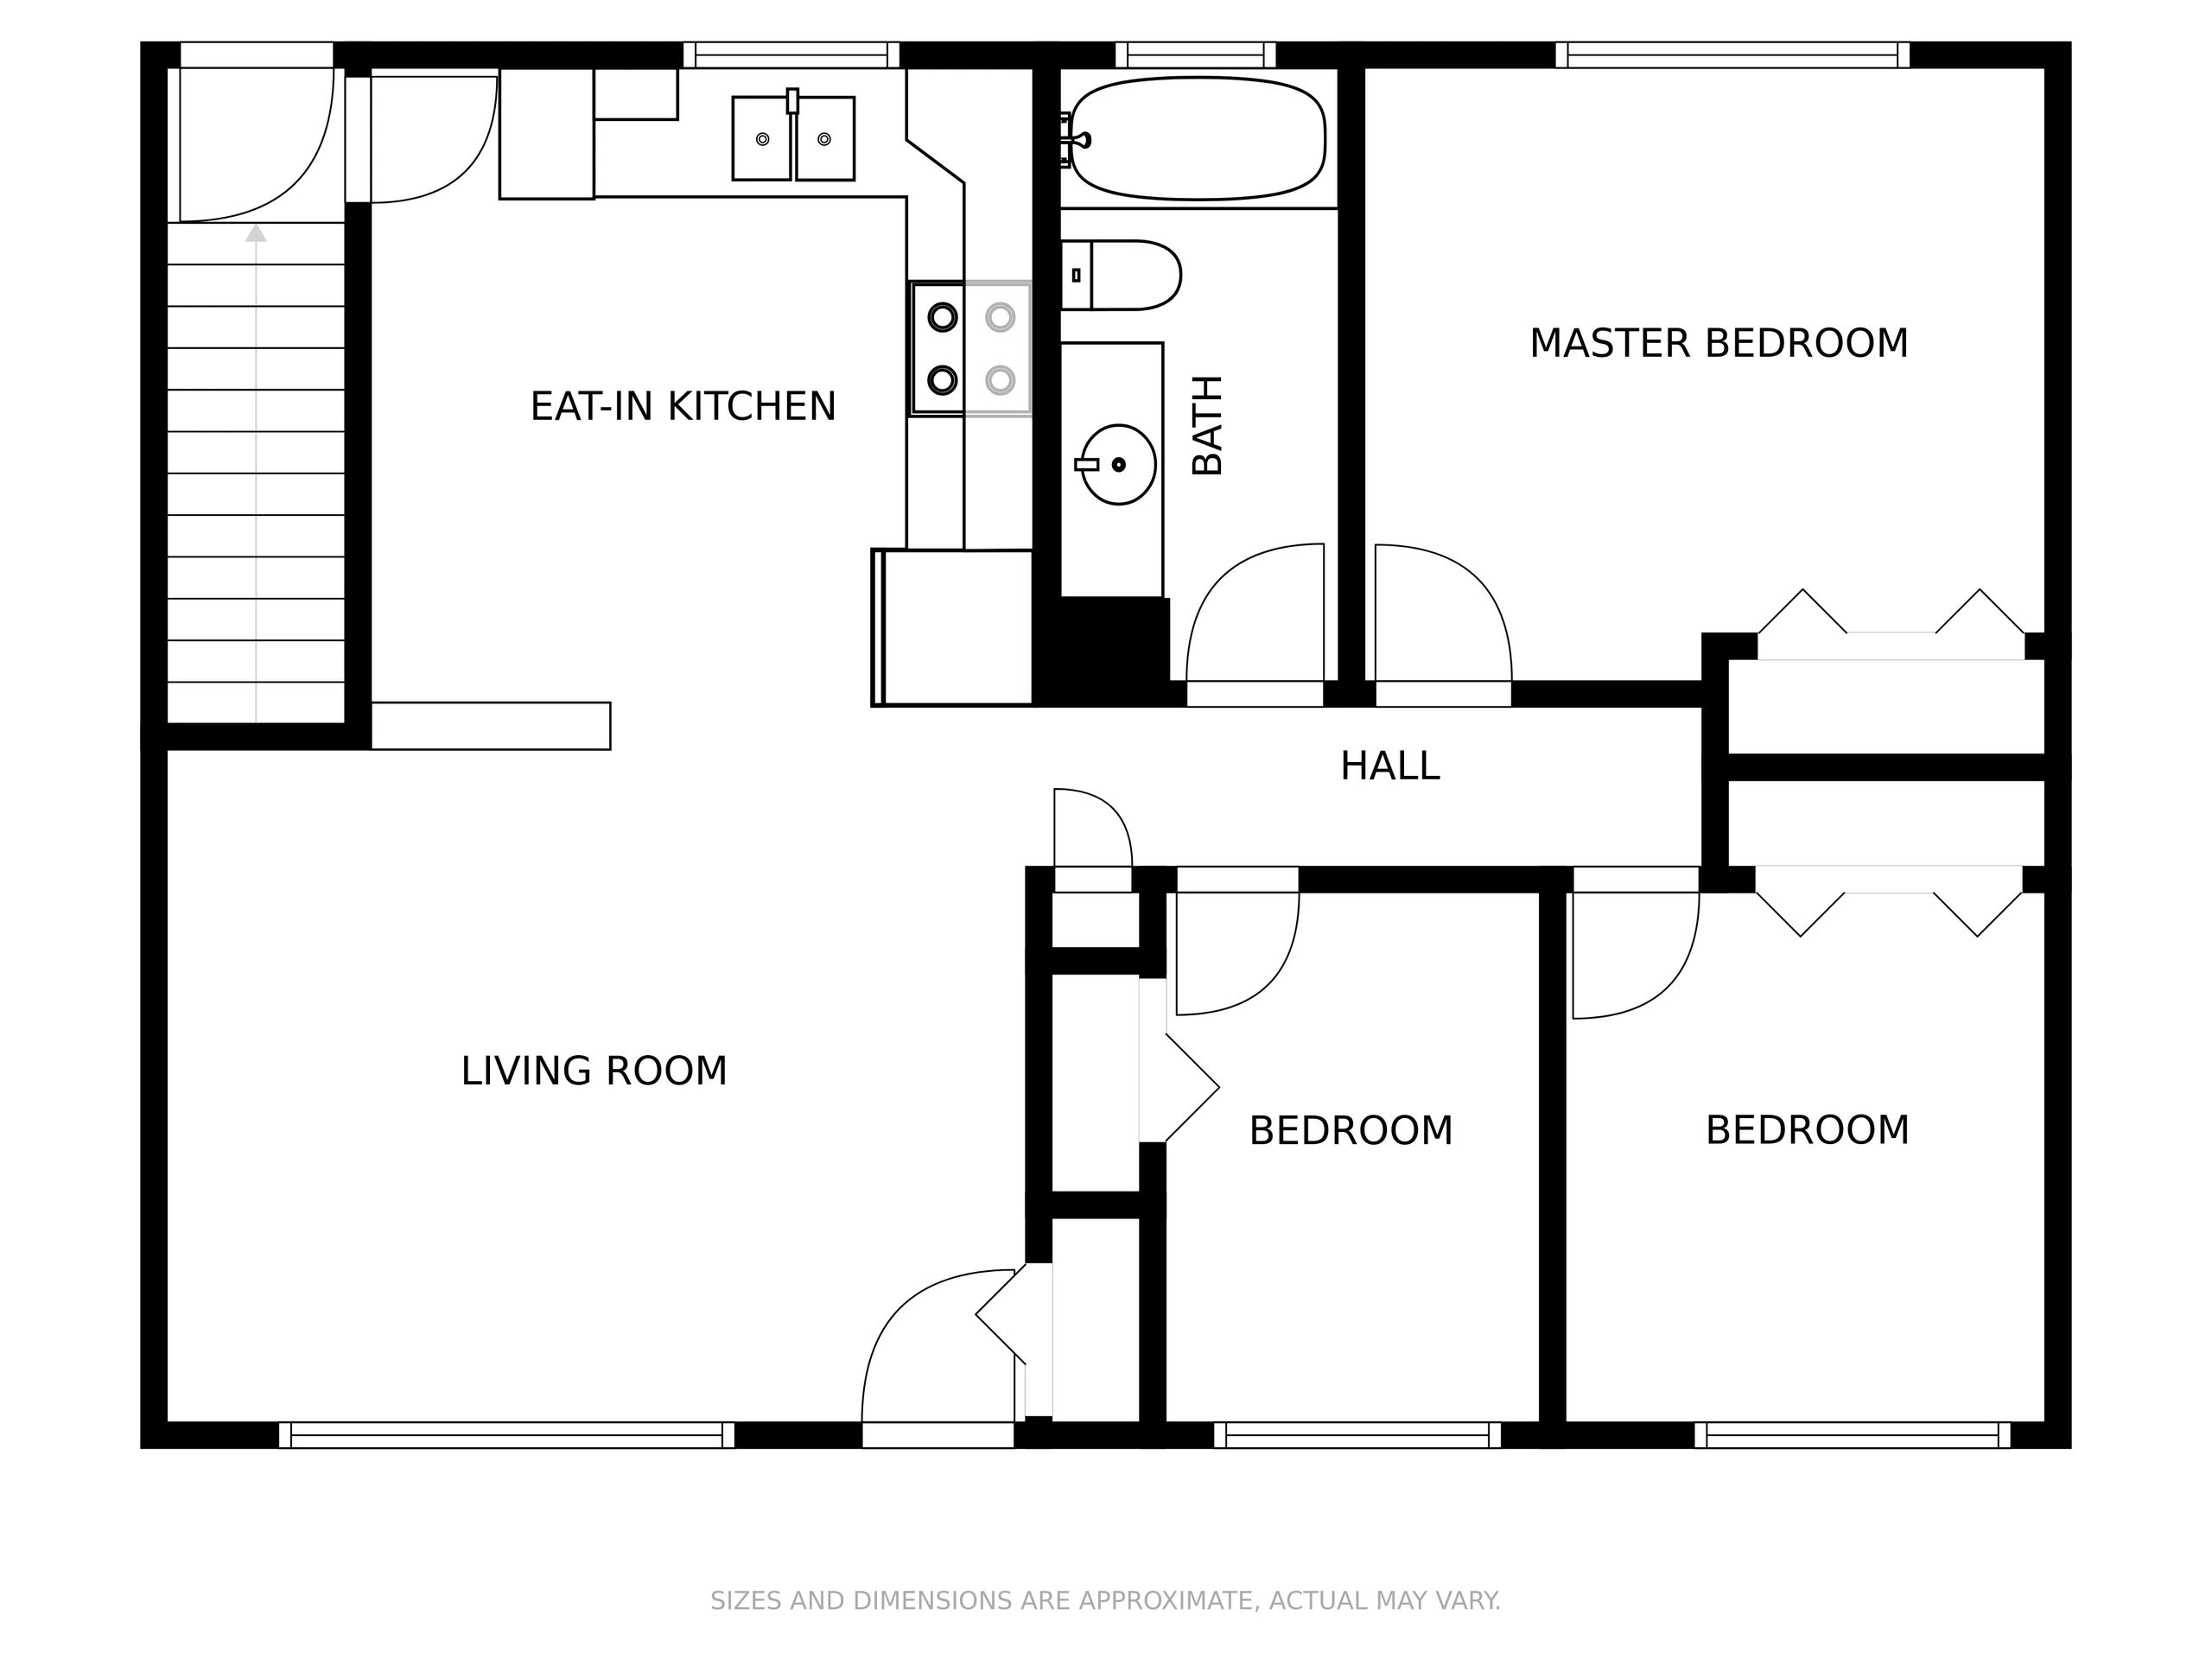 Floor Plans available branded/unbranded or no measurements/measurements.
Customization available